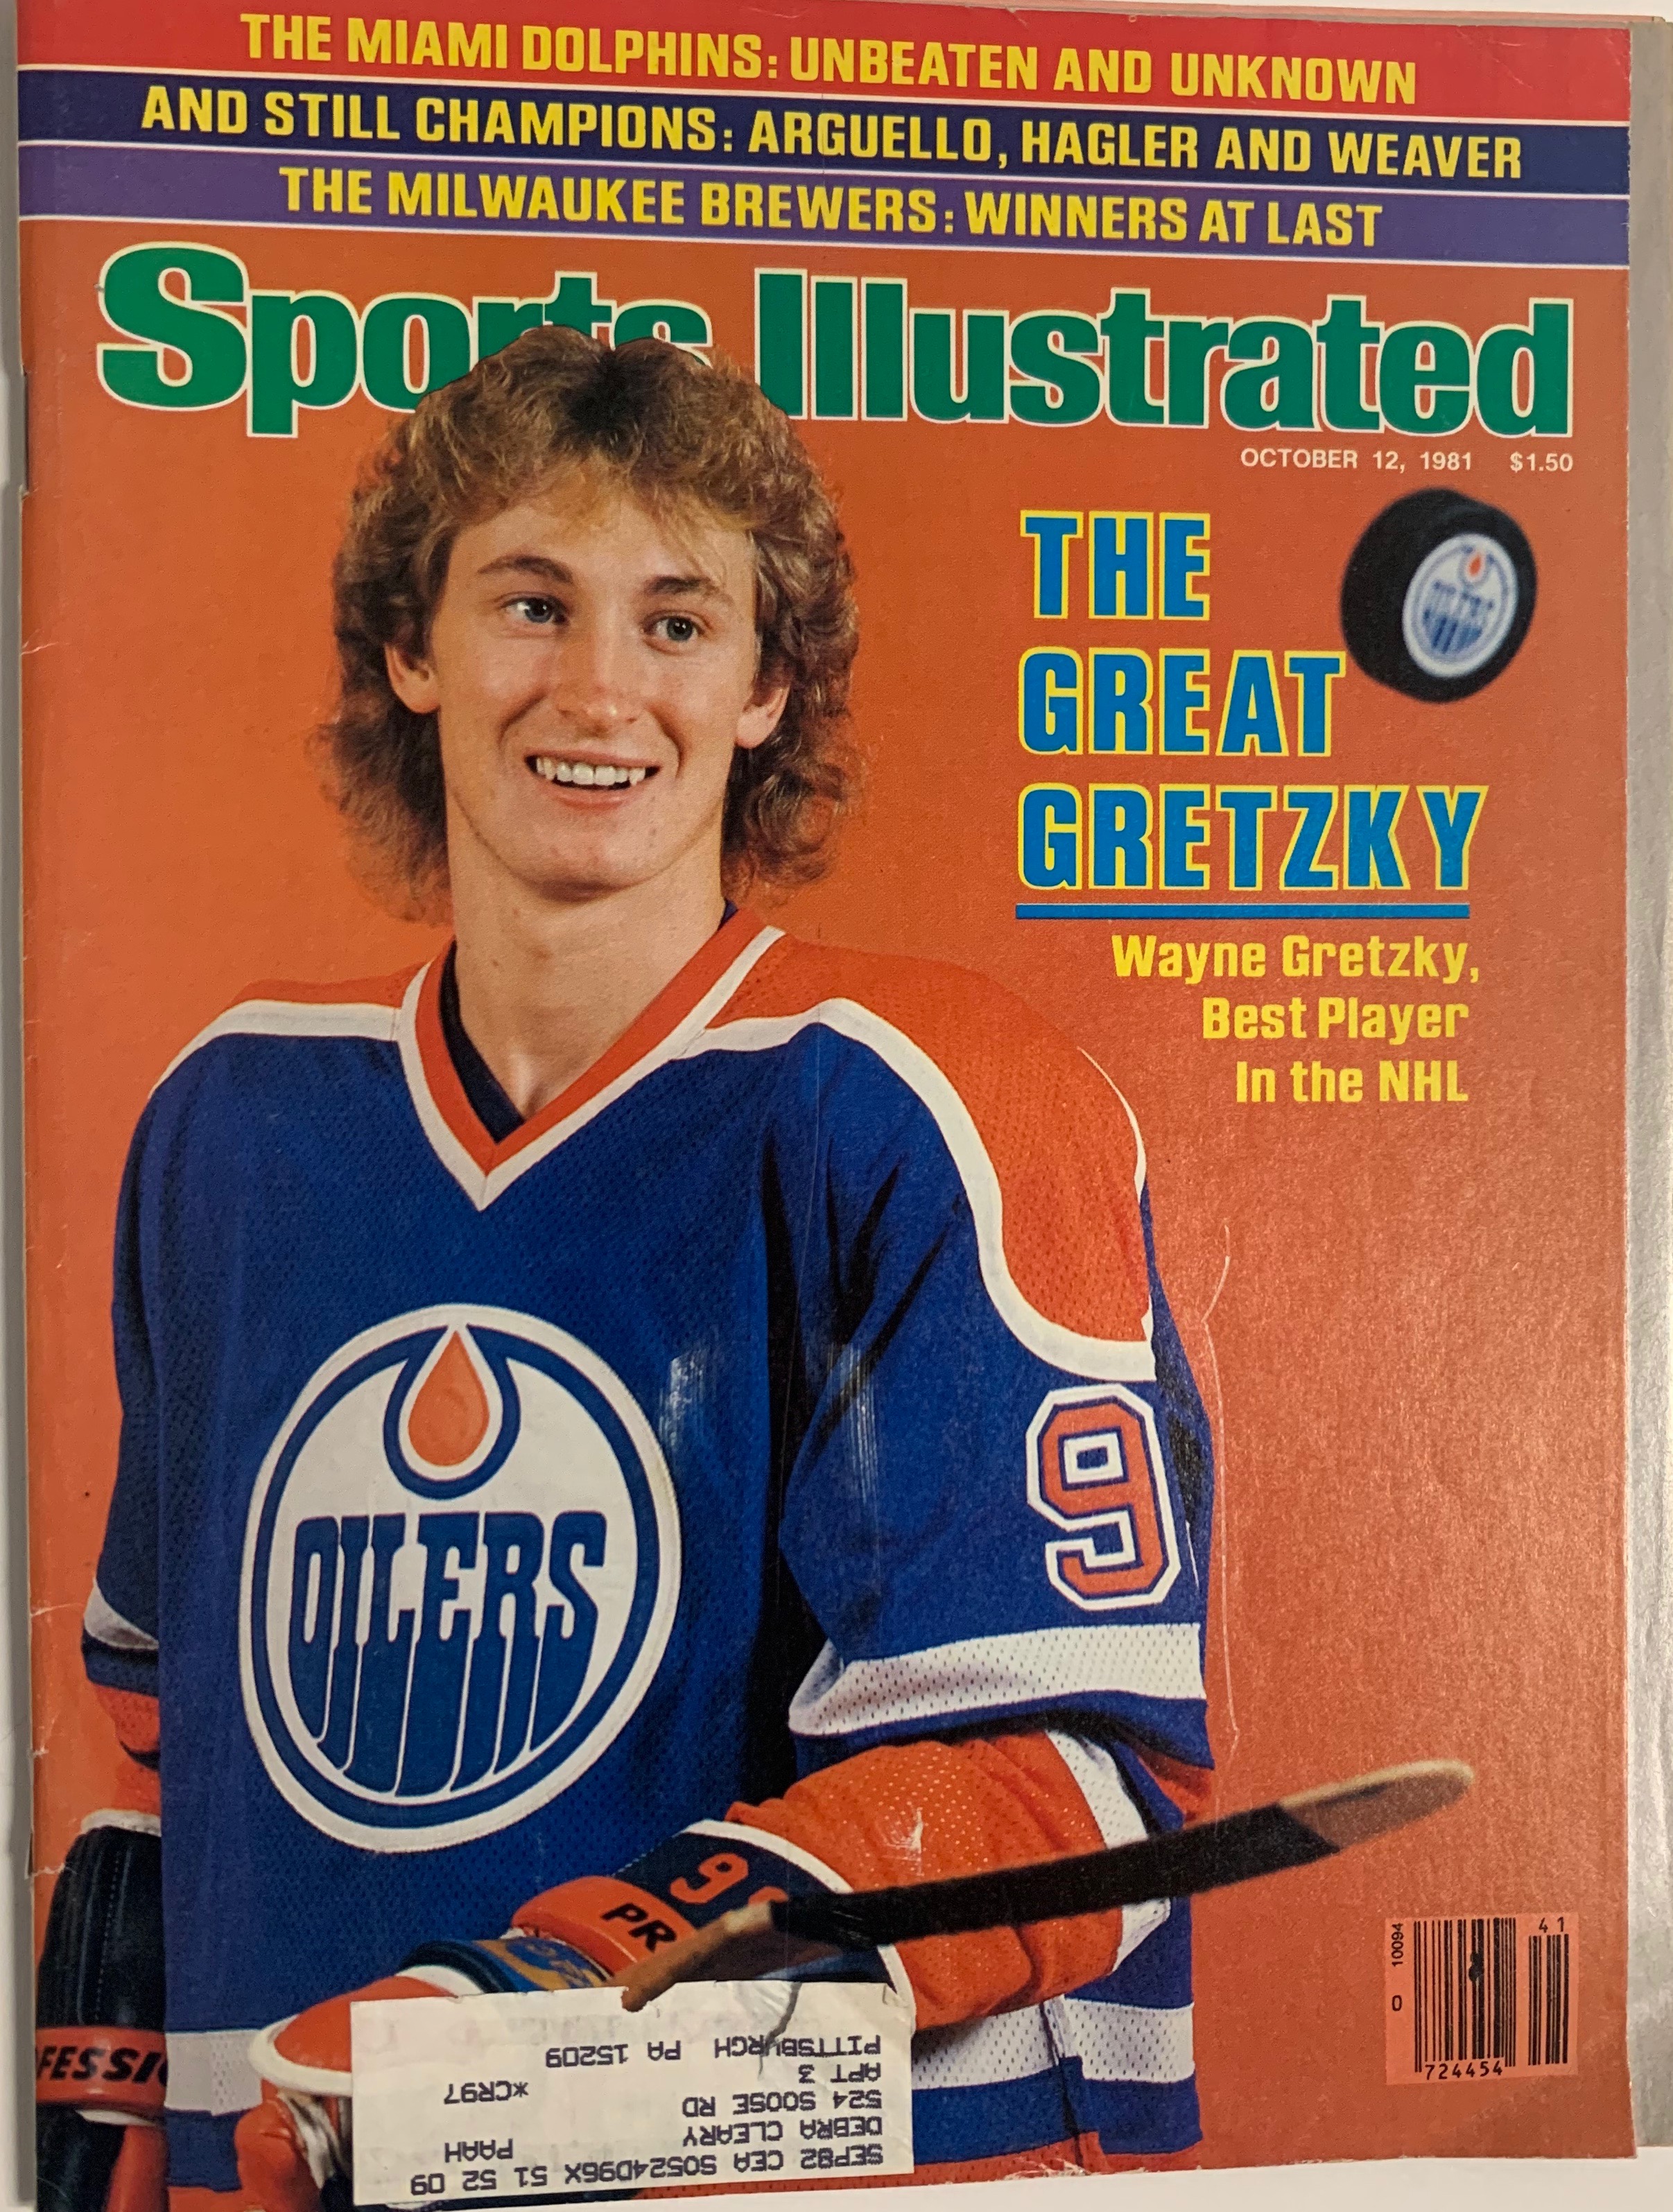 Wayne Gretzky rookie hockey card sets record at auction - Sports Illustrated